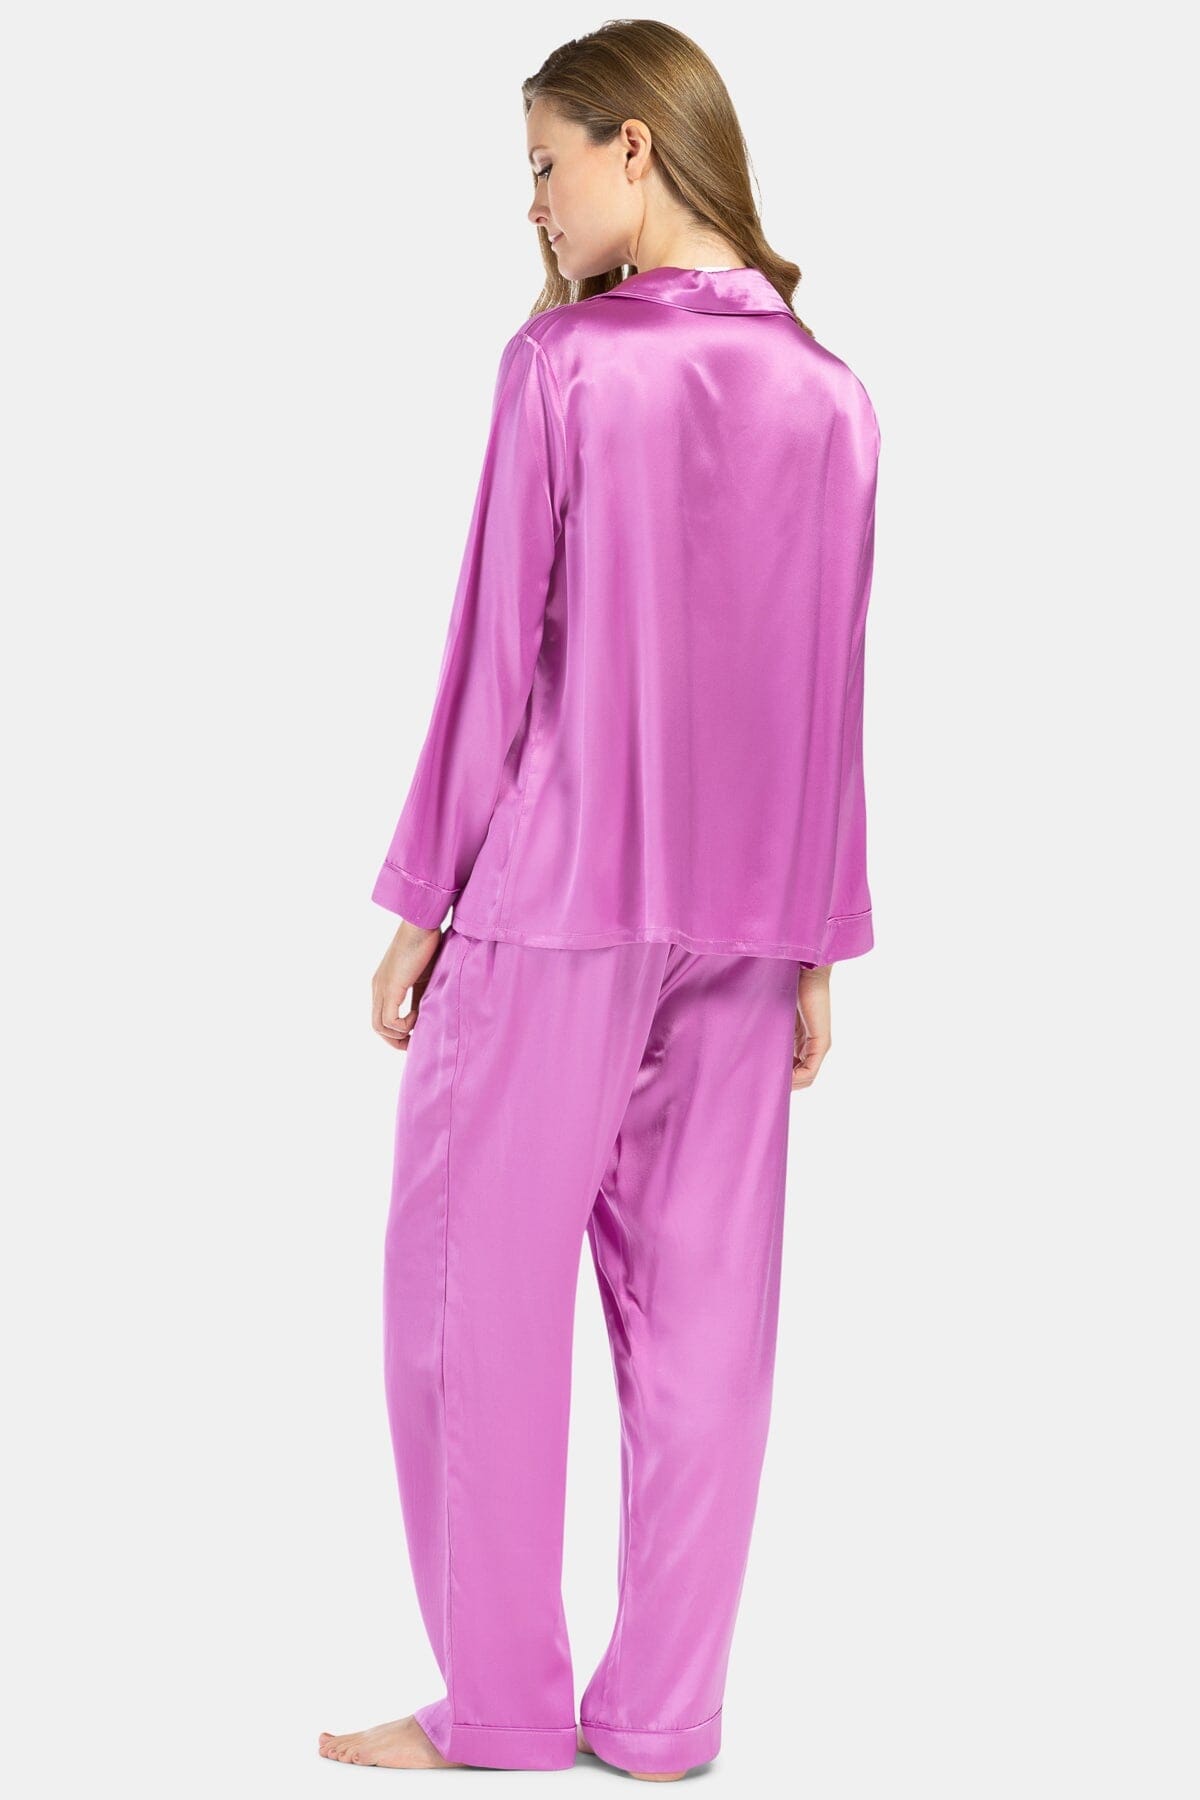 Women's 100% Mulberry Silk Classic Full Length Pajama Set with Gift Box